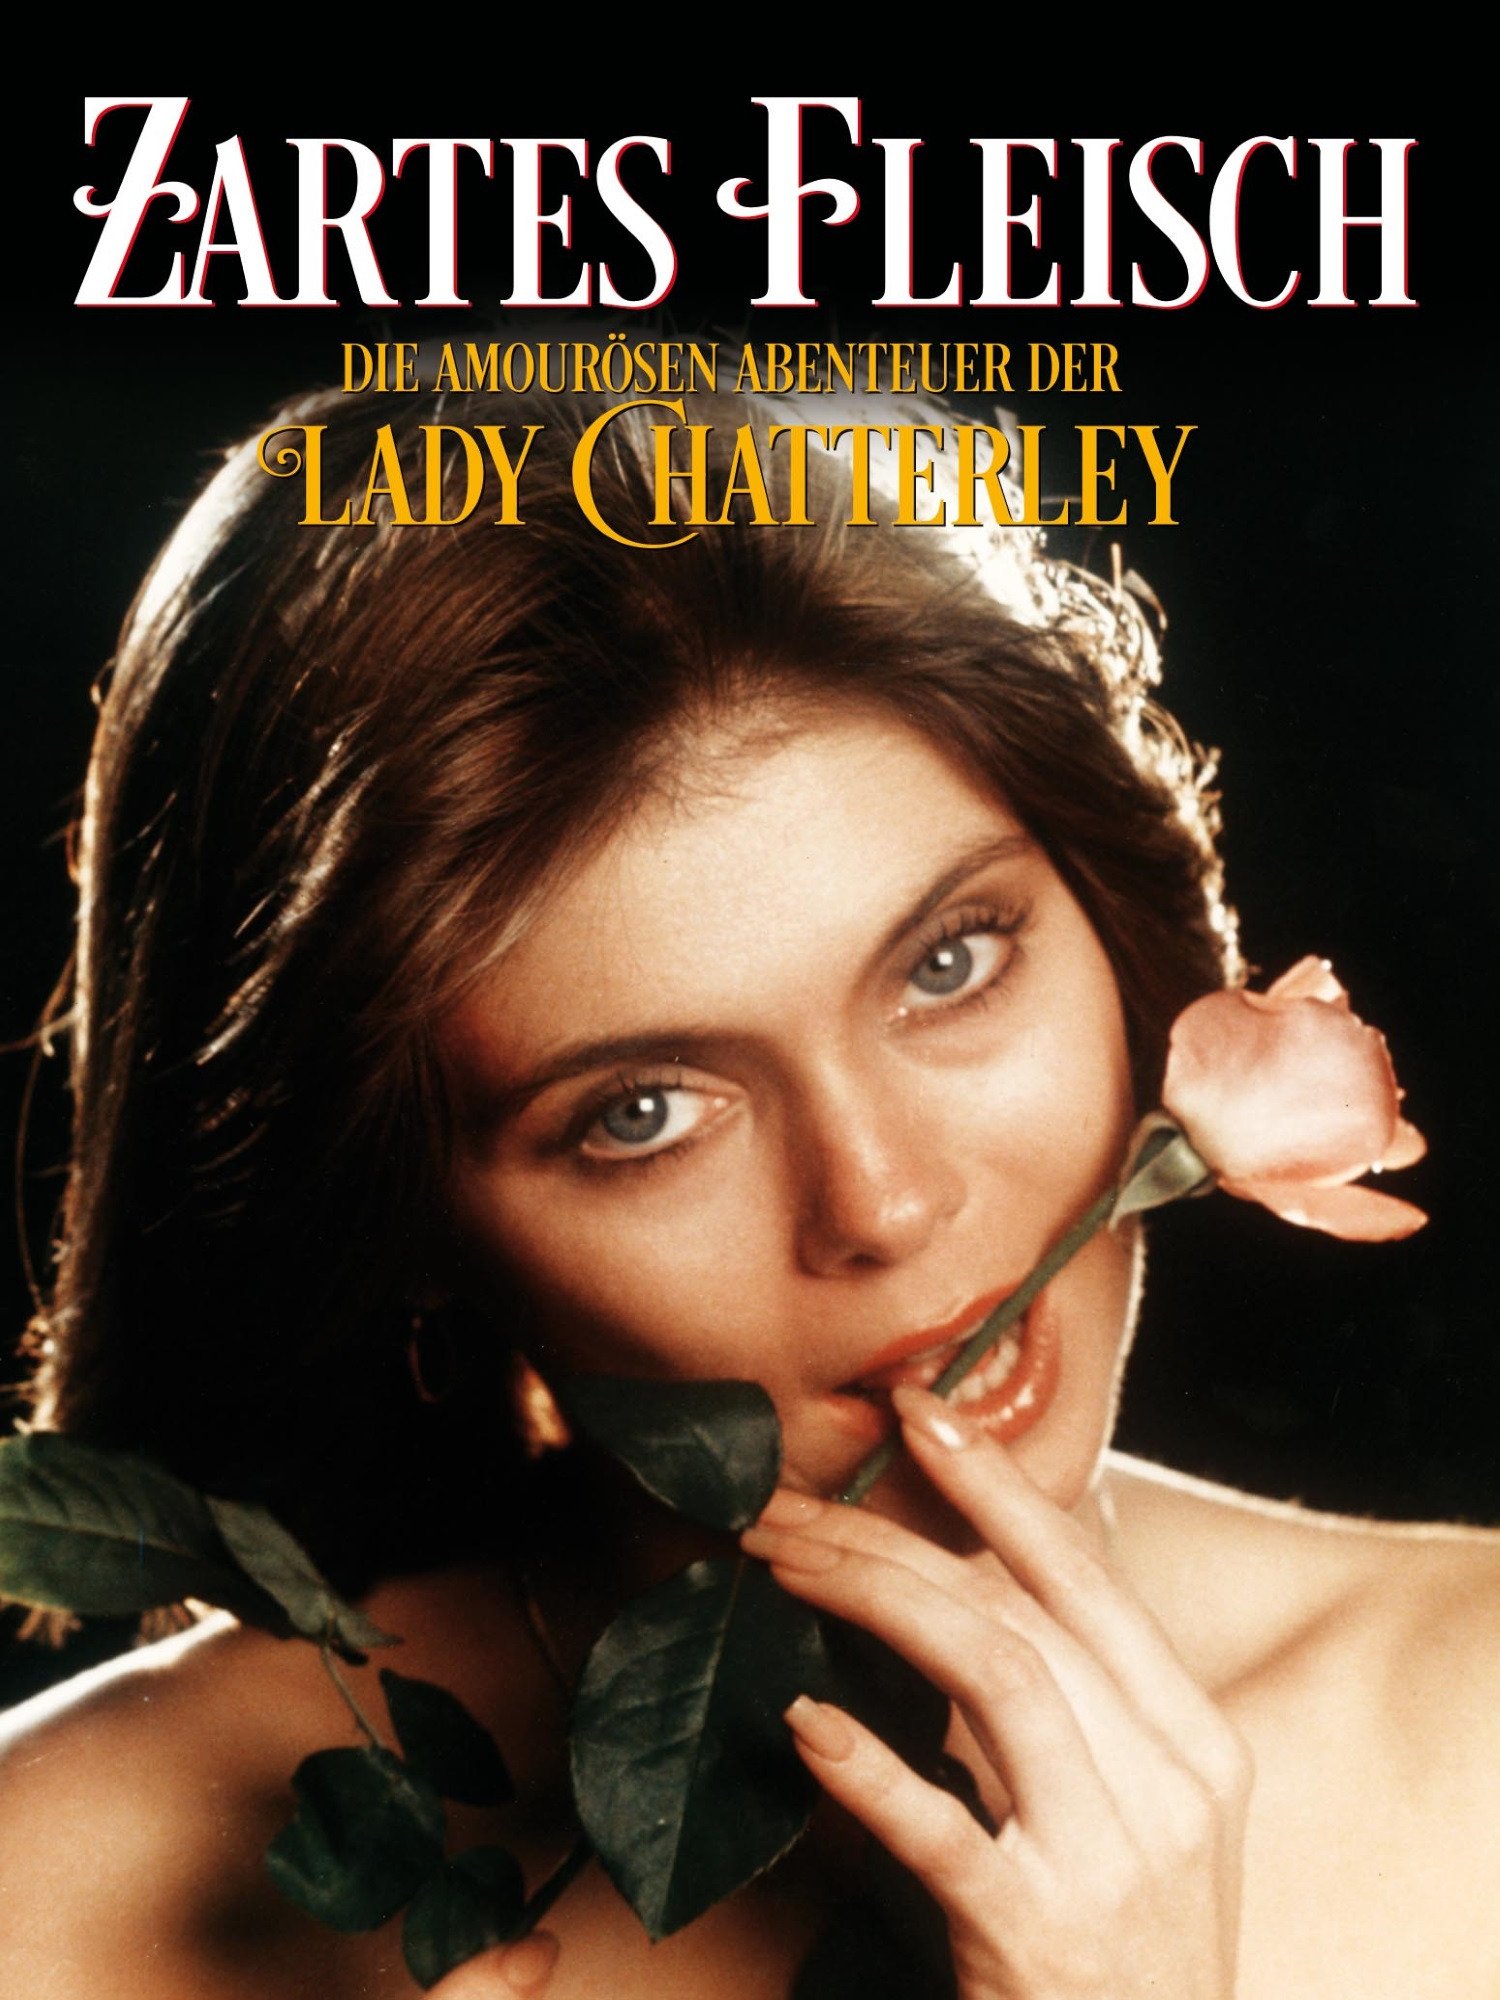 cheryl myrick recommends watch young lady chatterley pic